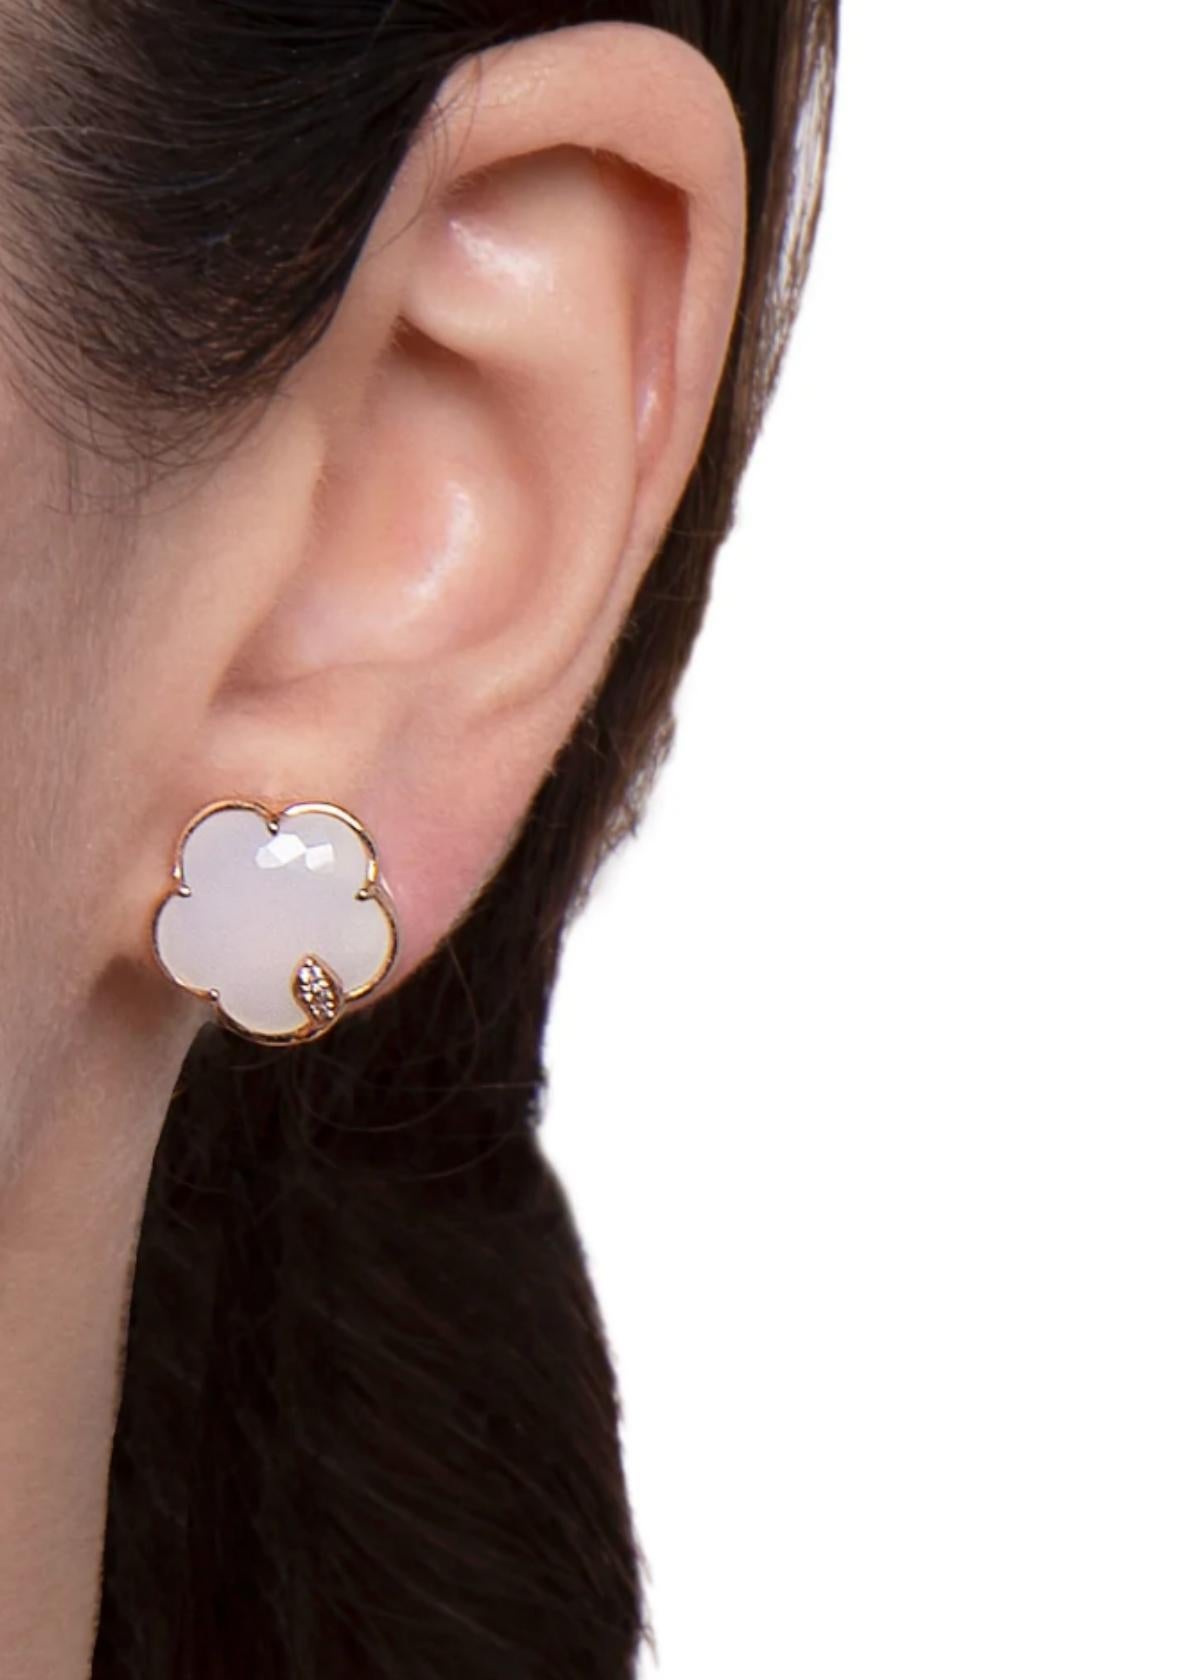 Petit Joli Stud Earrings in 18k Rose Gold with White Agate, White and Champagne Diamonds.

Petit Joli is a floral dream on your skin. The collection is designed for women always blooming in a free soul. This collection embodies the everlasting